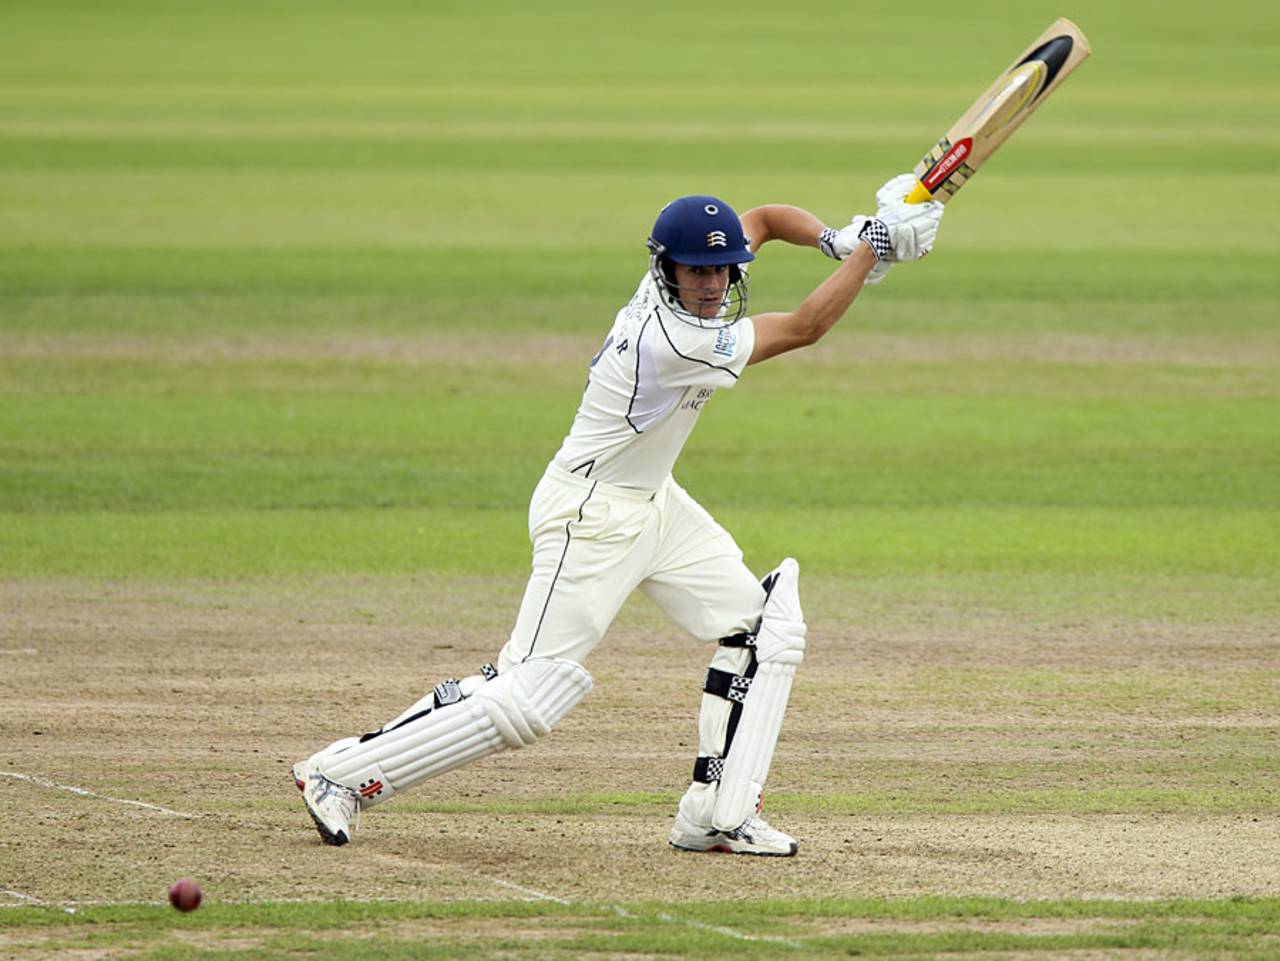 Neil Dexter drives square during his hundred, Warwickshire v Middlesex, County Championship, Division One, Edgbaston, August 21, 2012